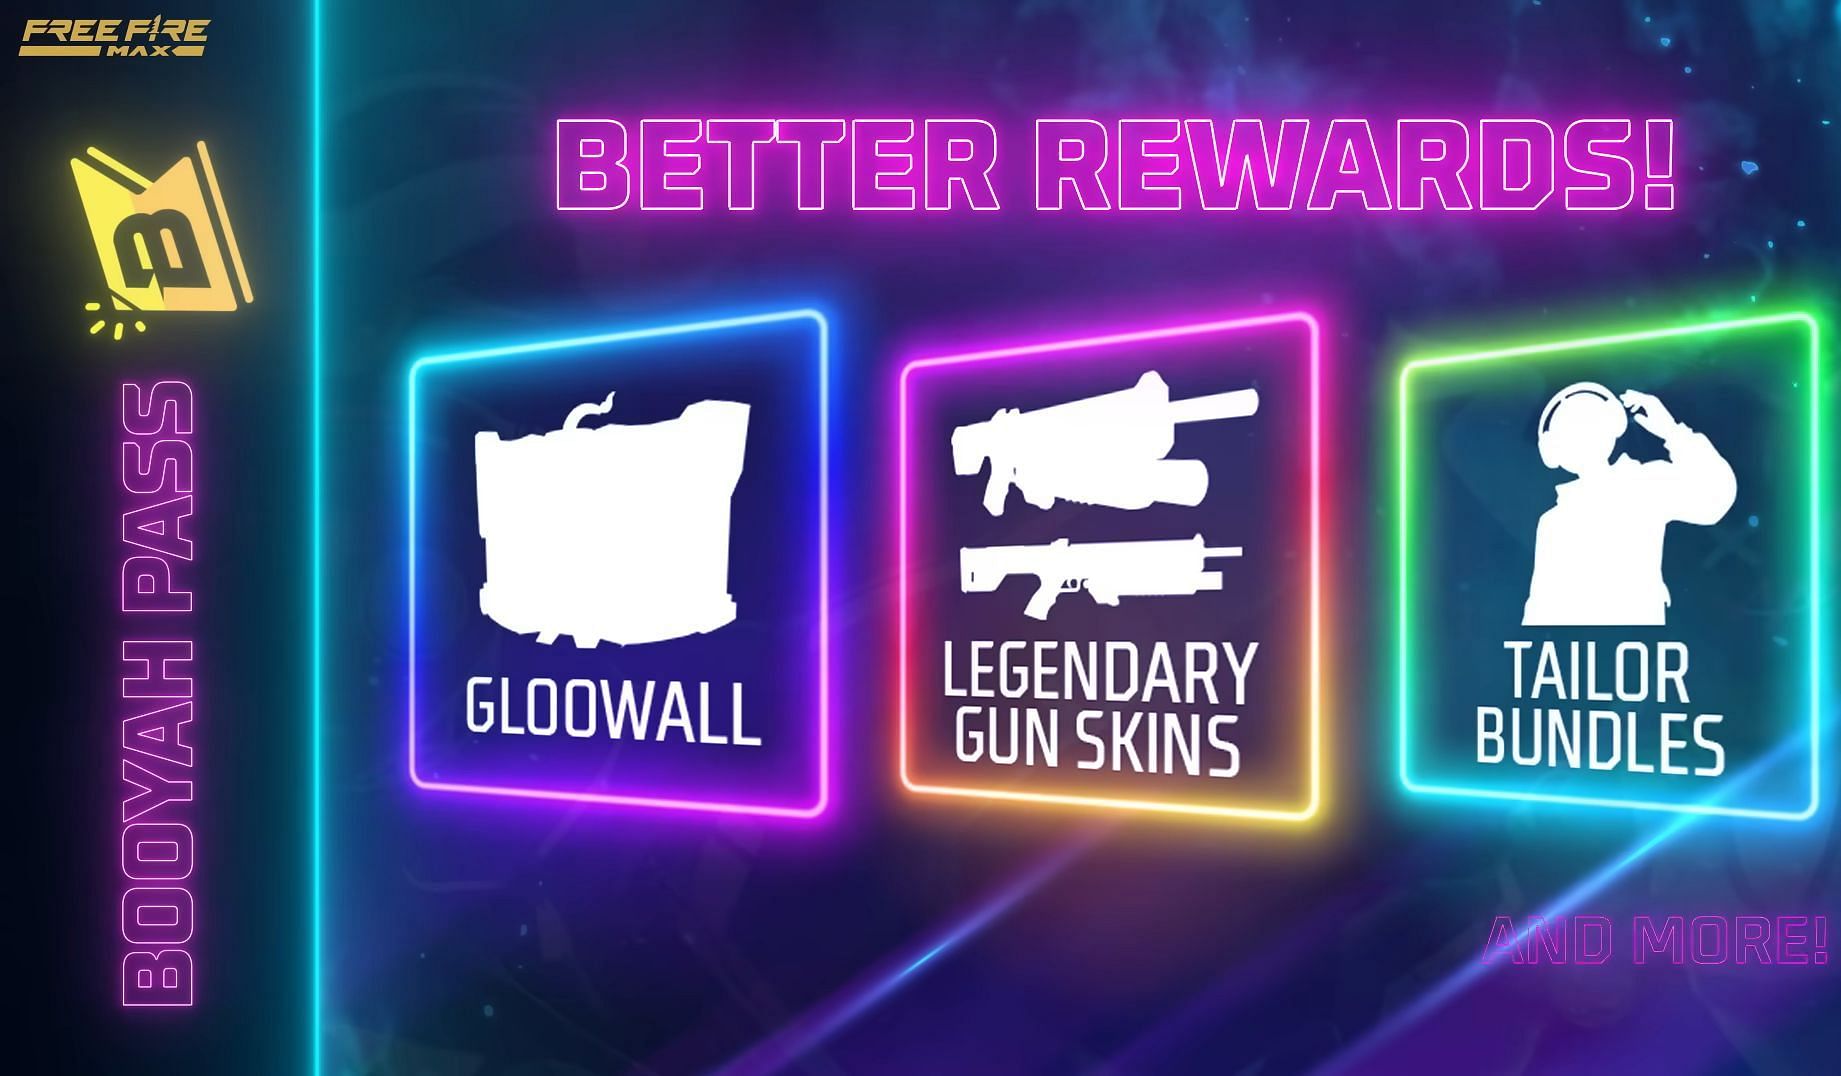 Booyah Pass will bring more exciting rewards to the game (Image via Garena)